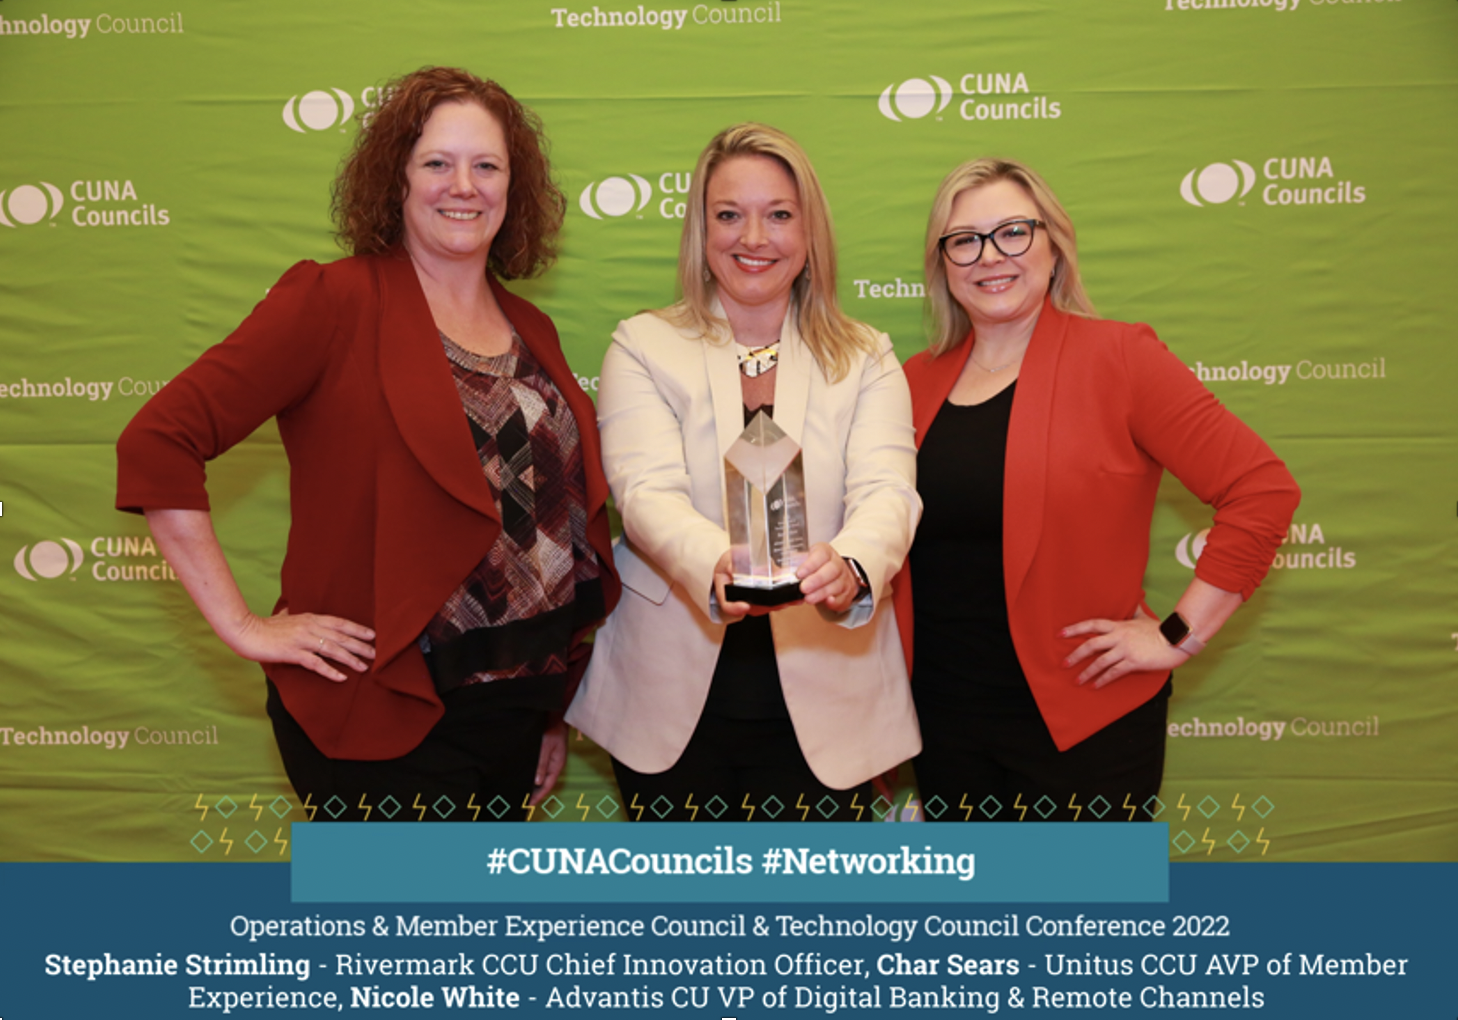 three women holding an award from CUNA for Excellence in Technology